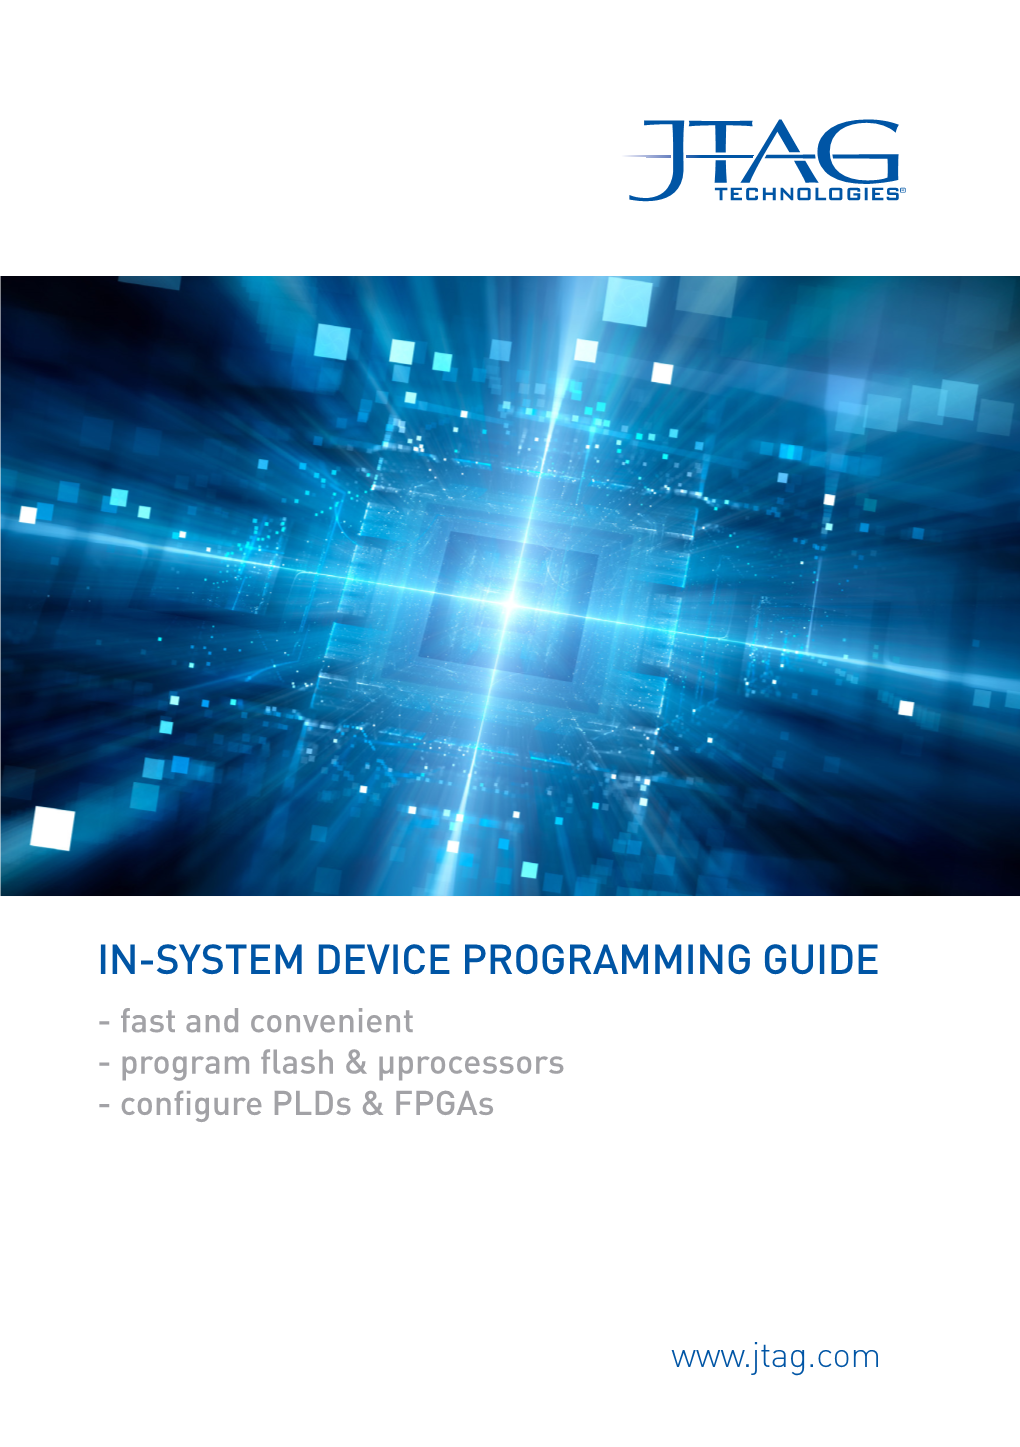 IN-SYSTEM DEVICE PROGRAMMING GUIDE - Fast and Convenient - Program Flash & Μprocessors - Configurepld S & Fpgas